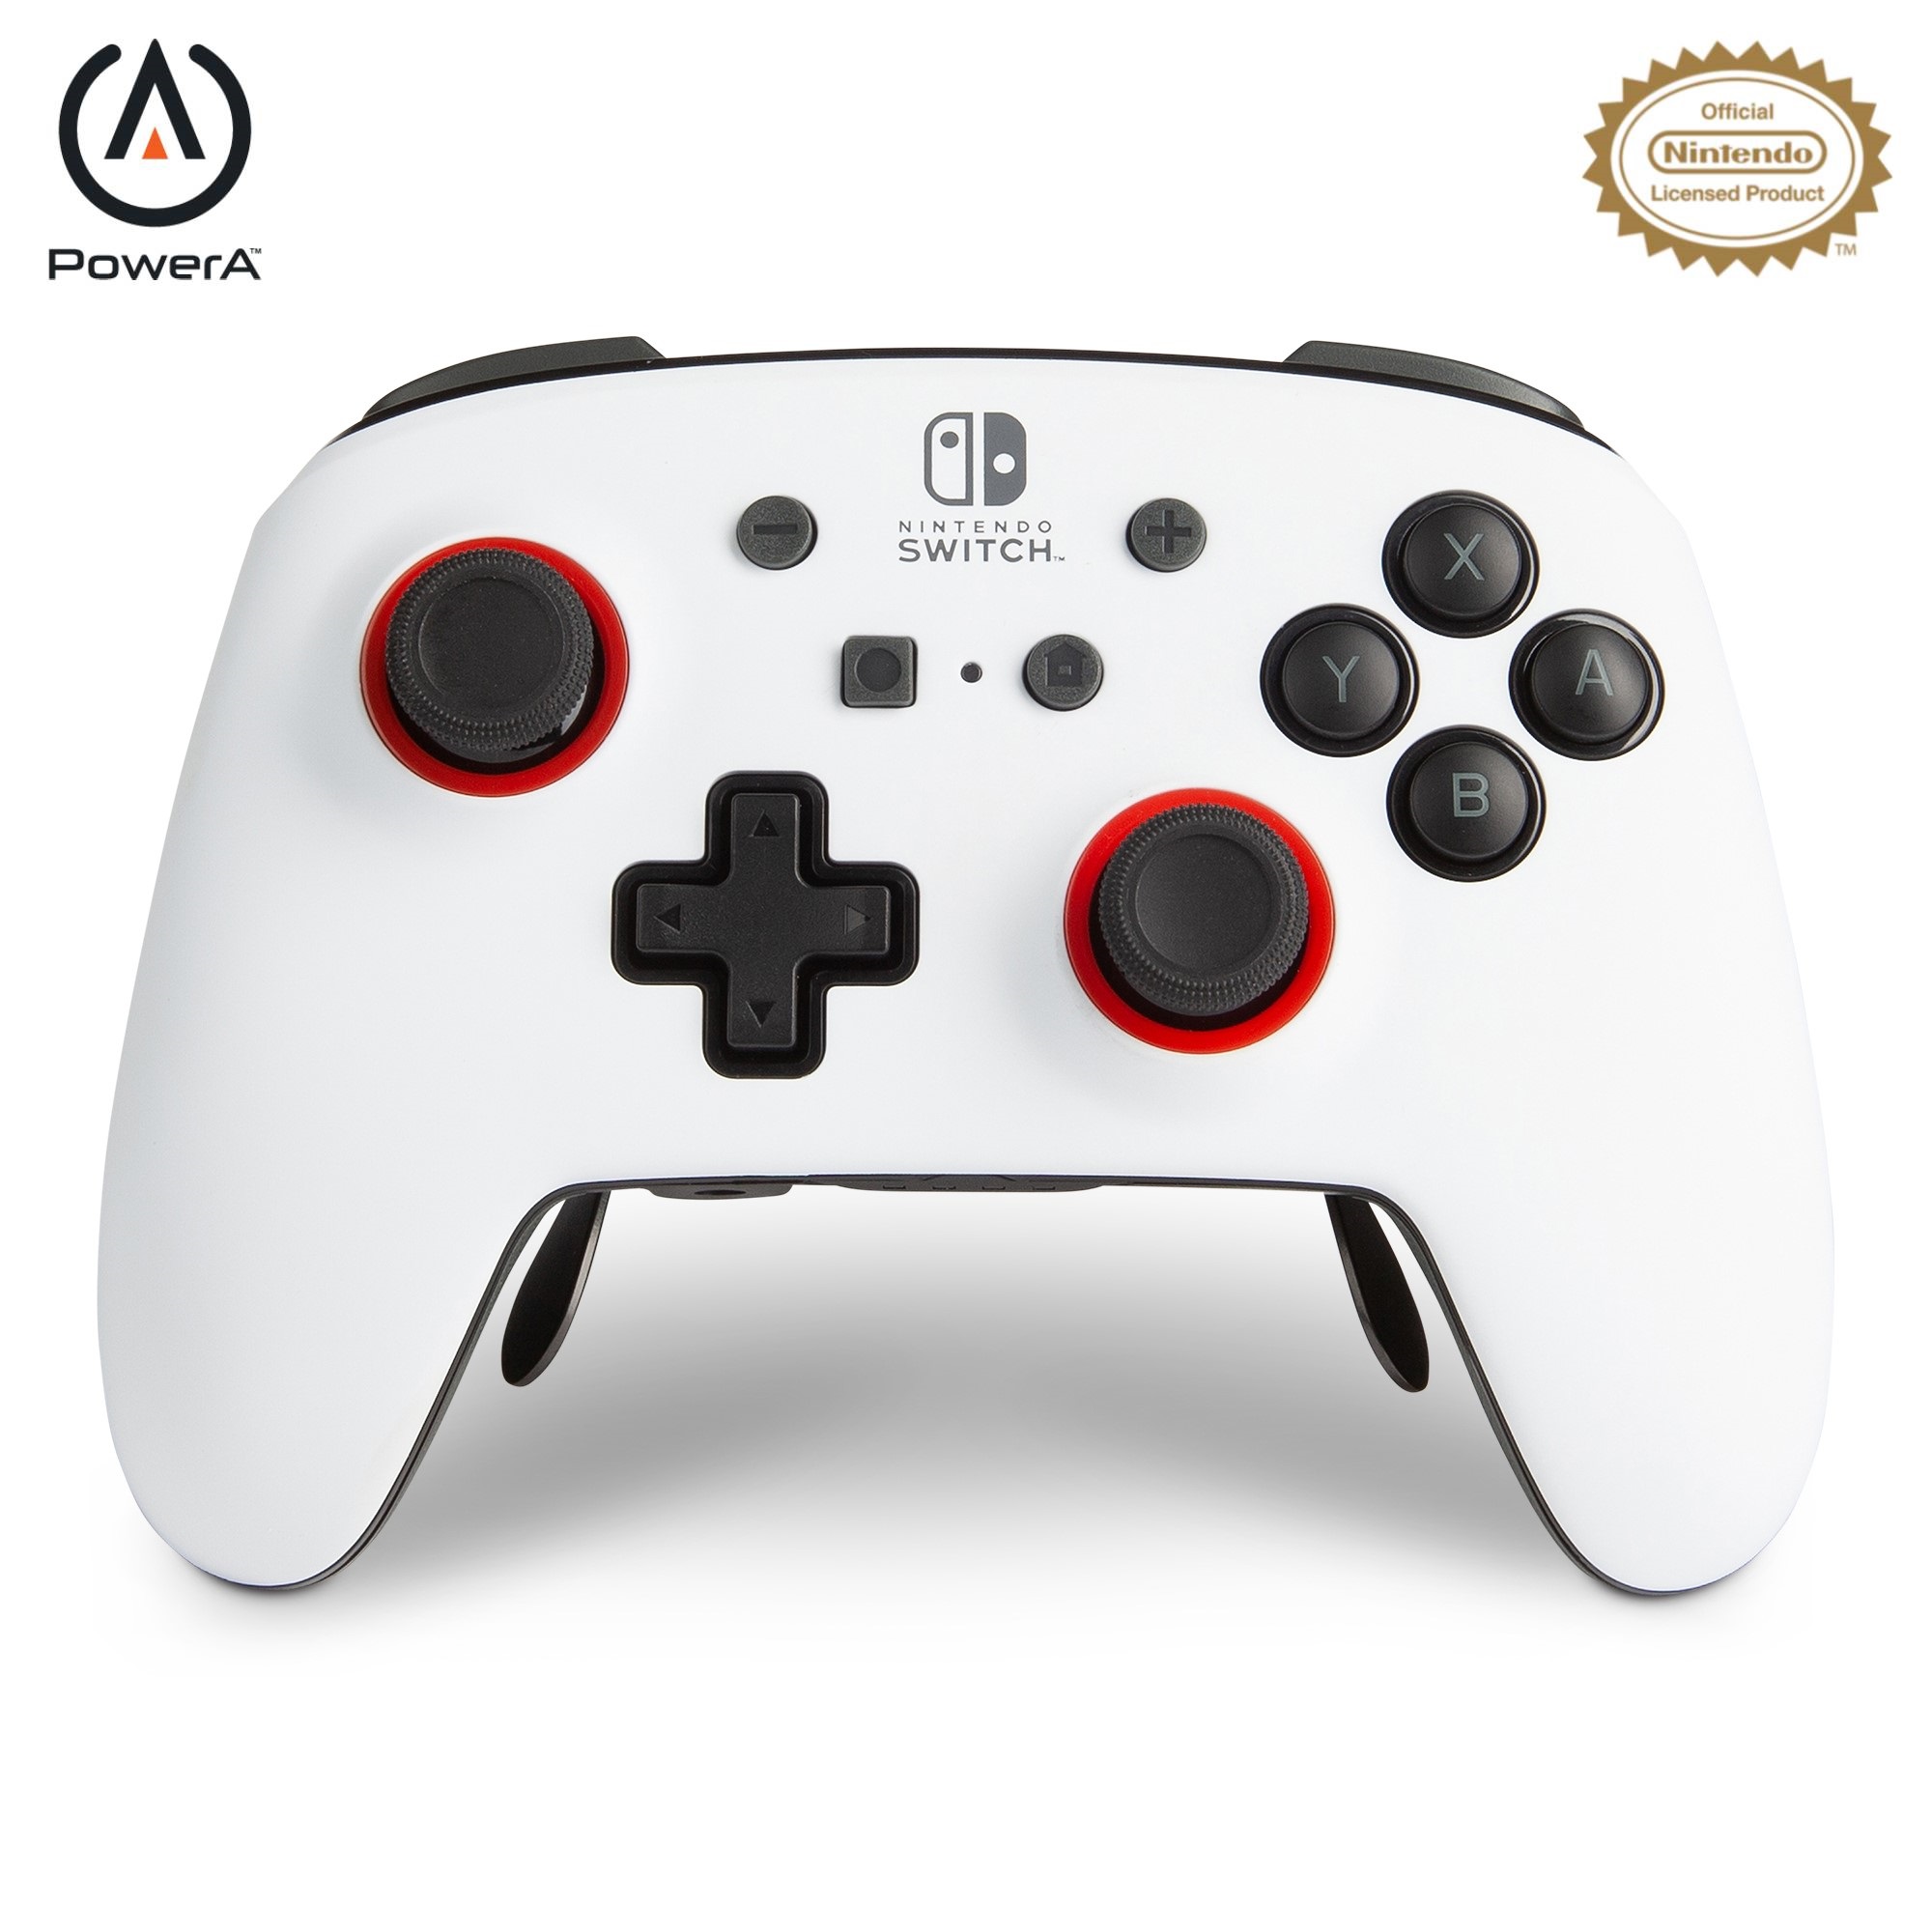 https://www.powera.com/siteassets/commerce-materials/category-pages/category-page-og-image/nintendo_1669663039.jpg